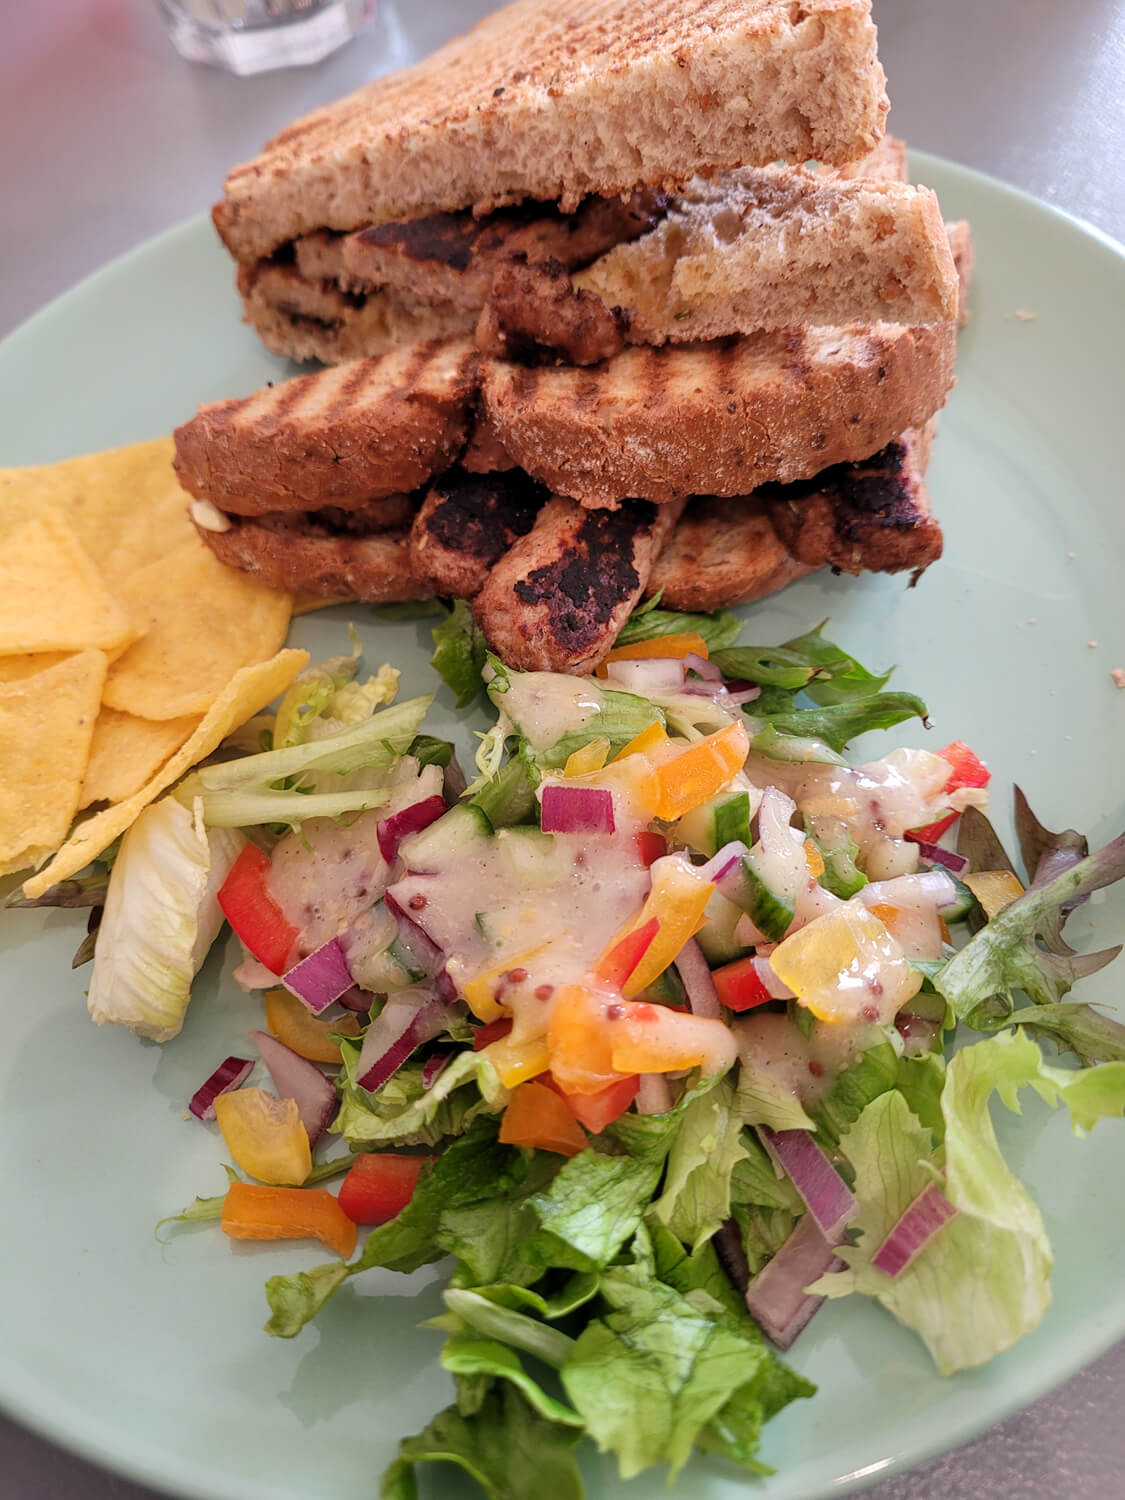 A plate with vegan sausage sandwich and salad.